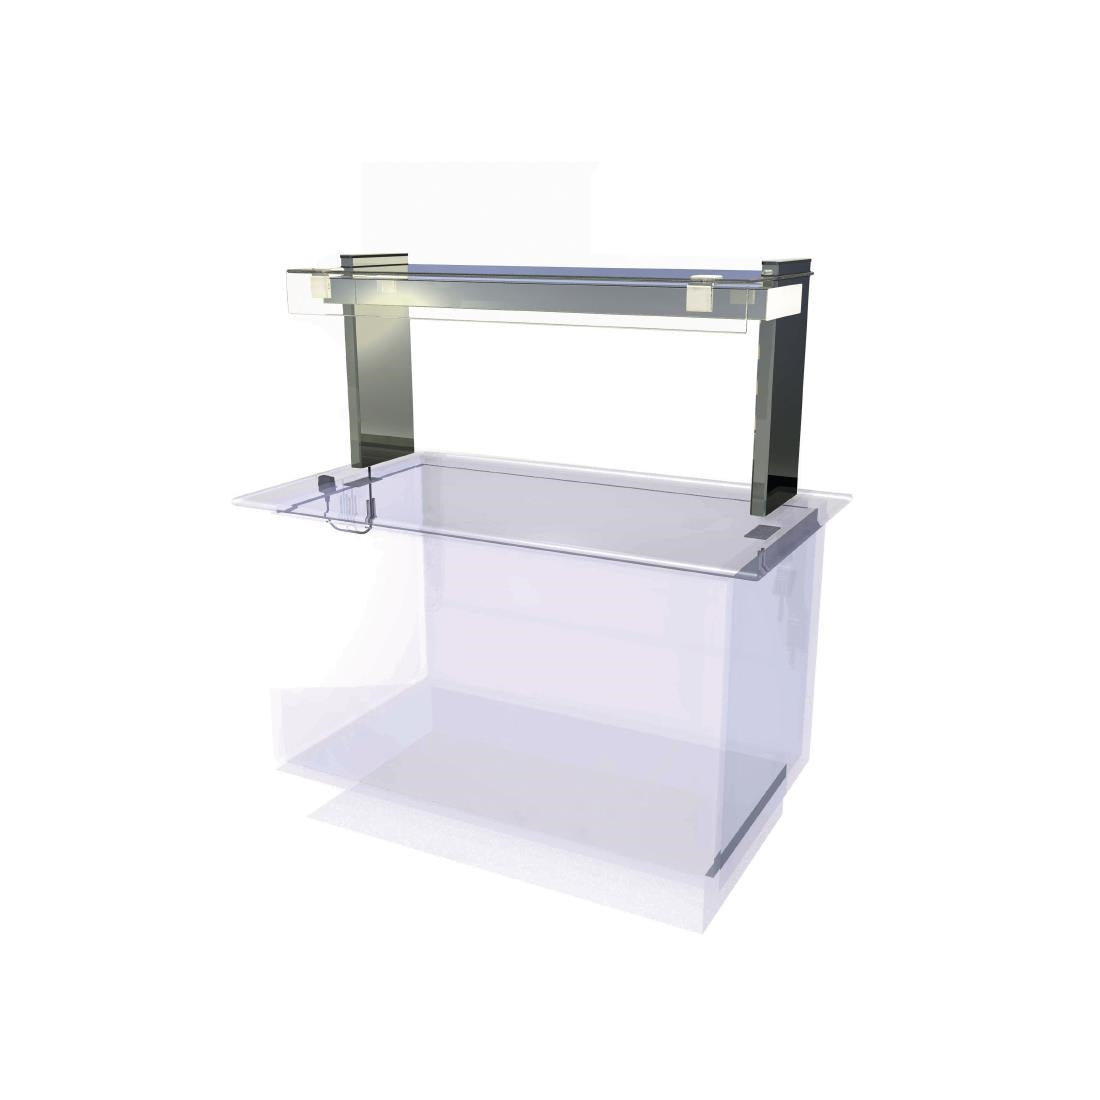 CW622 Kubus Drop In Ambient Display KAG4 JD Catering Equipment Solutions Ltd